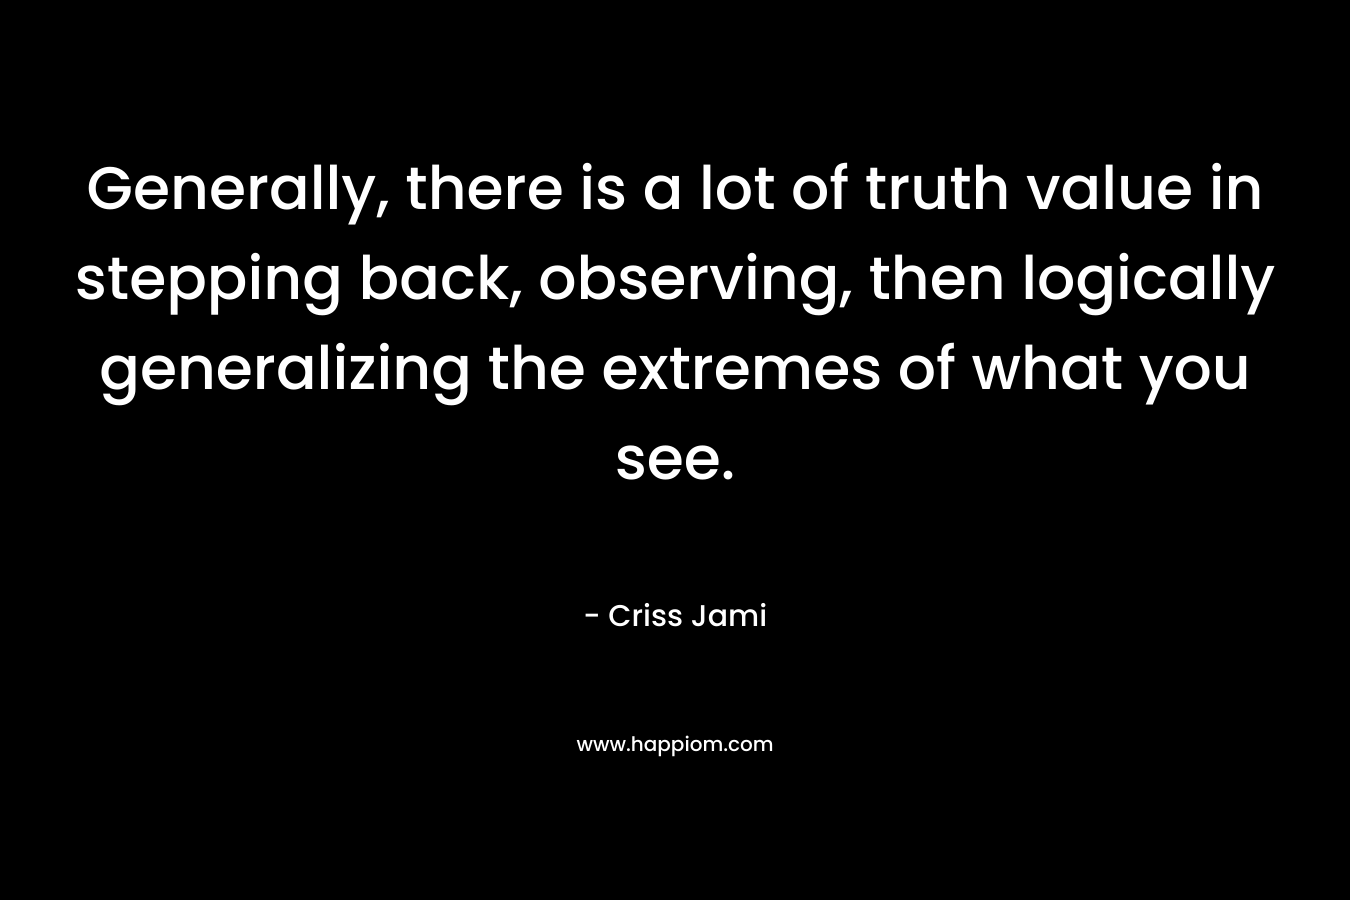 Generally, there is a lot of truth value in stepping back, observing, then logically generalizing the extremes of what you see. – Criss Jami